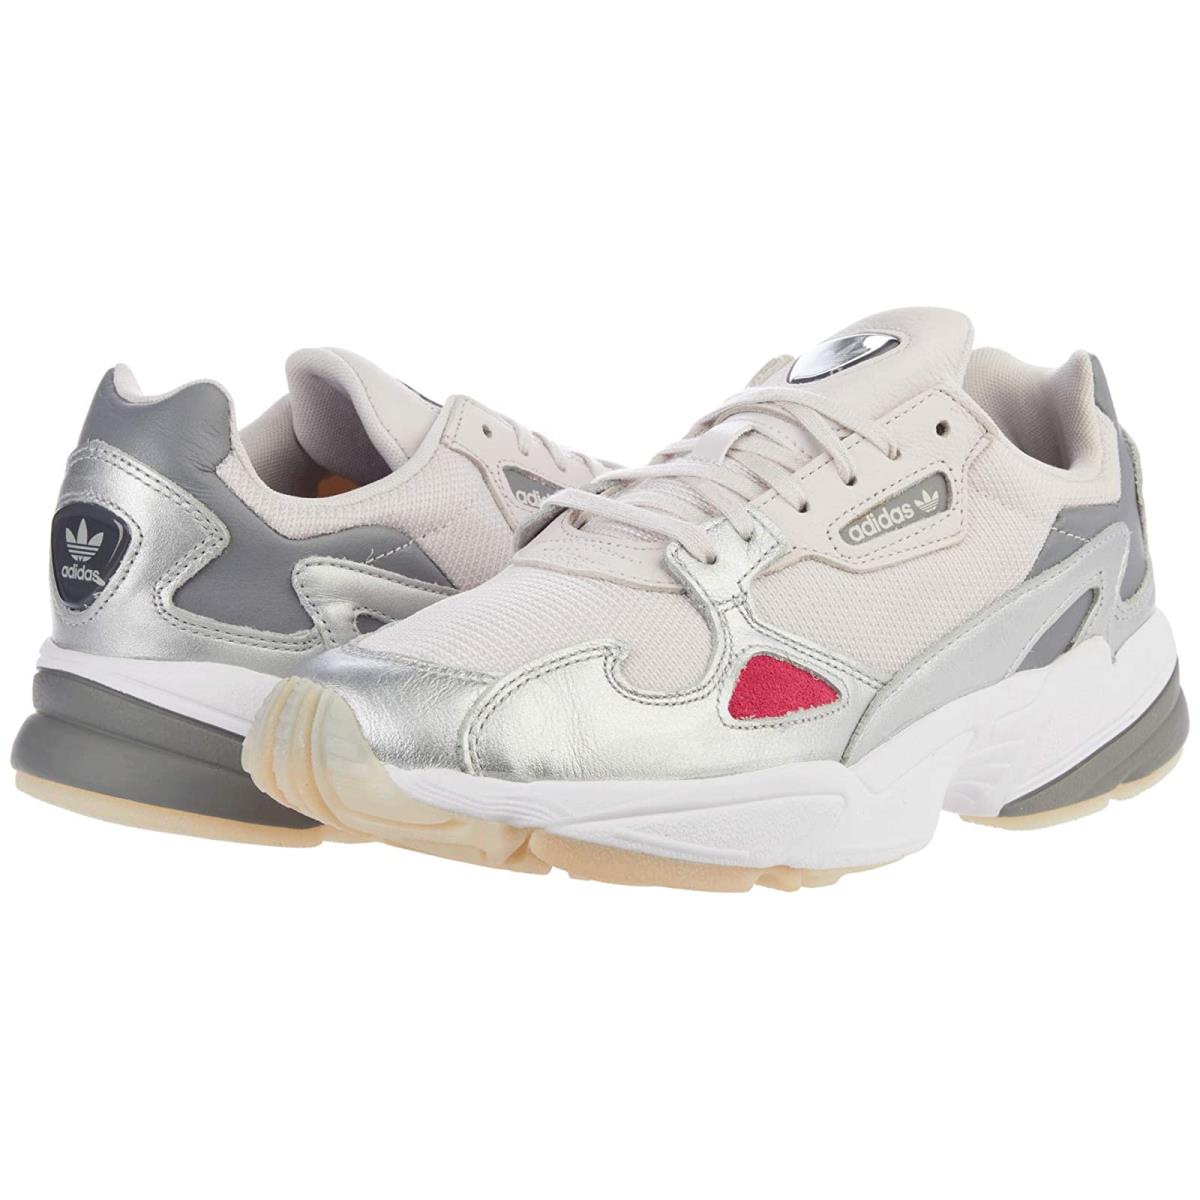 Woman`s Sneakers Athletic Shoes Adidas Falcon Orchid Tint/Orchid Tint/Silver Metallic